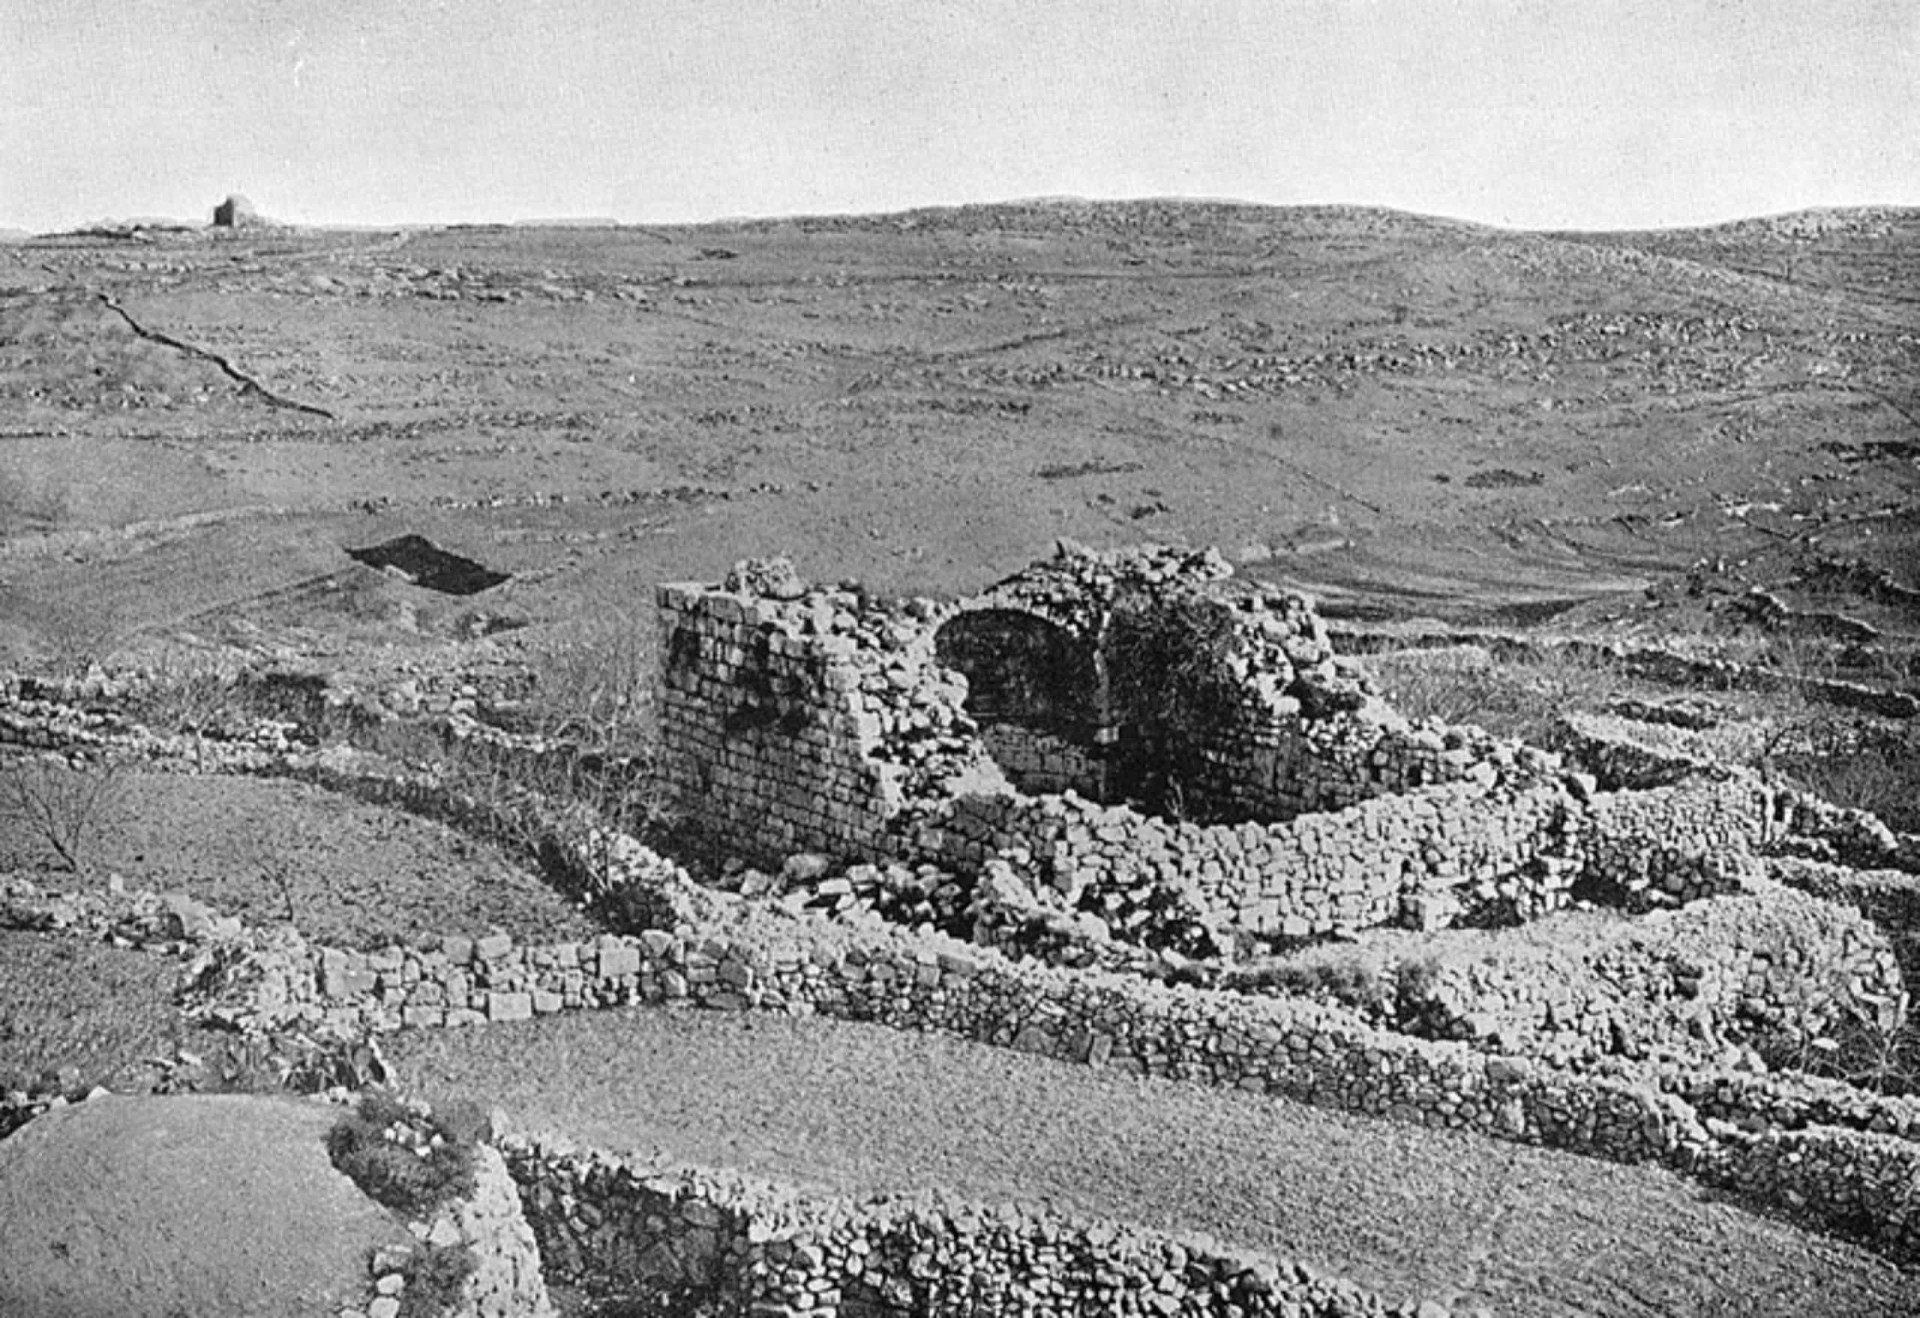 <p>The Ark then turns up in Bethal, the place where Jacob falls asleep and dreams of a ladder stretching between Heaven and Earth and thronged with angels. In Bethal, the Ark is being cared for by the priest Phineas. Pictured are the ruins of Bethal in the 19th century. The Palestinian village of Beitan has been identified as the biblical Bethal.</p><p><a href="https://www.msn.com/en-ph/community/channel/vid-7xx8mnucu55yw63we9va2gwr7uihbxwc68fxqp25x6tg4ftibpra?cvid=94631541bc0f4f89bfd59158d696ad7e">Follow us and access great exclusive content every day</a></p>